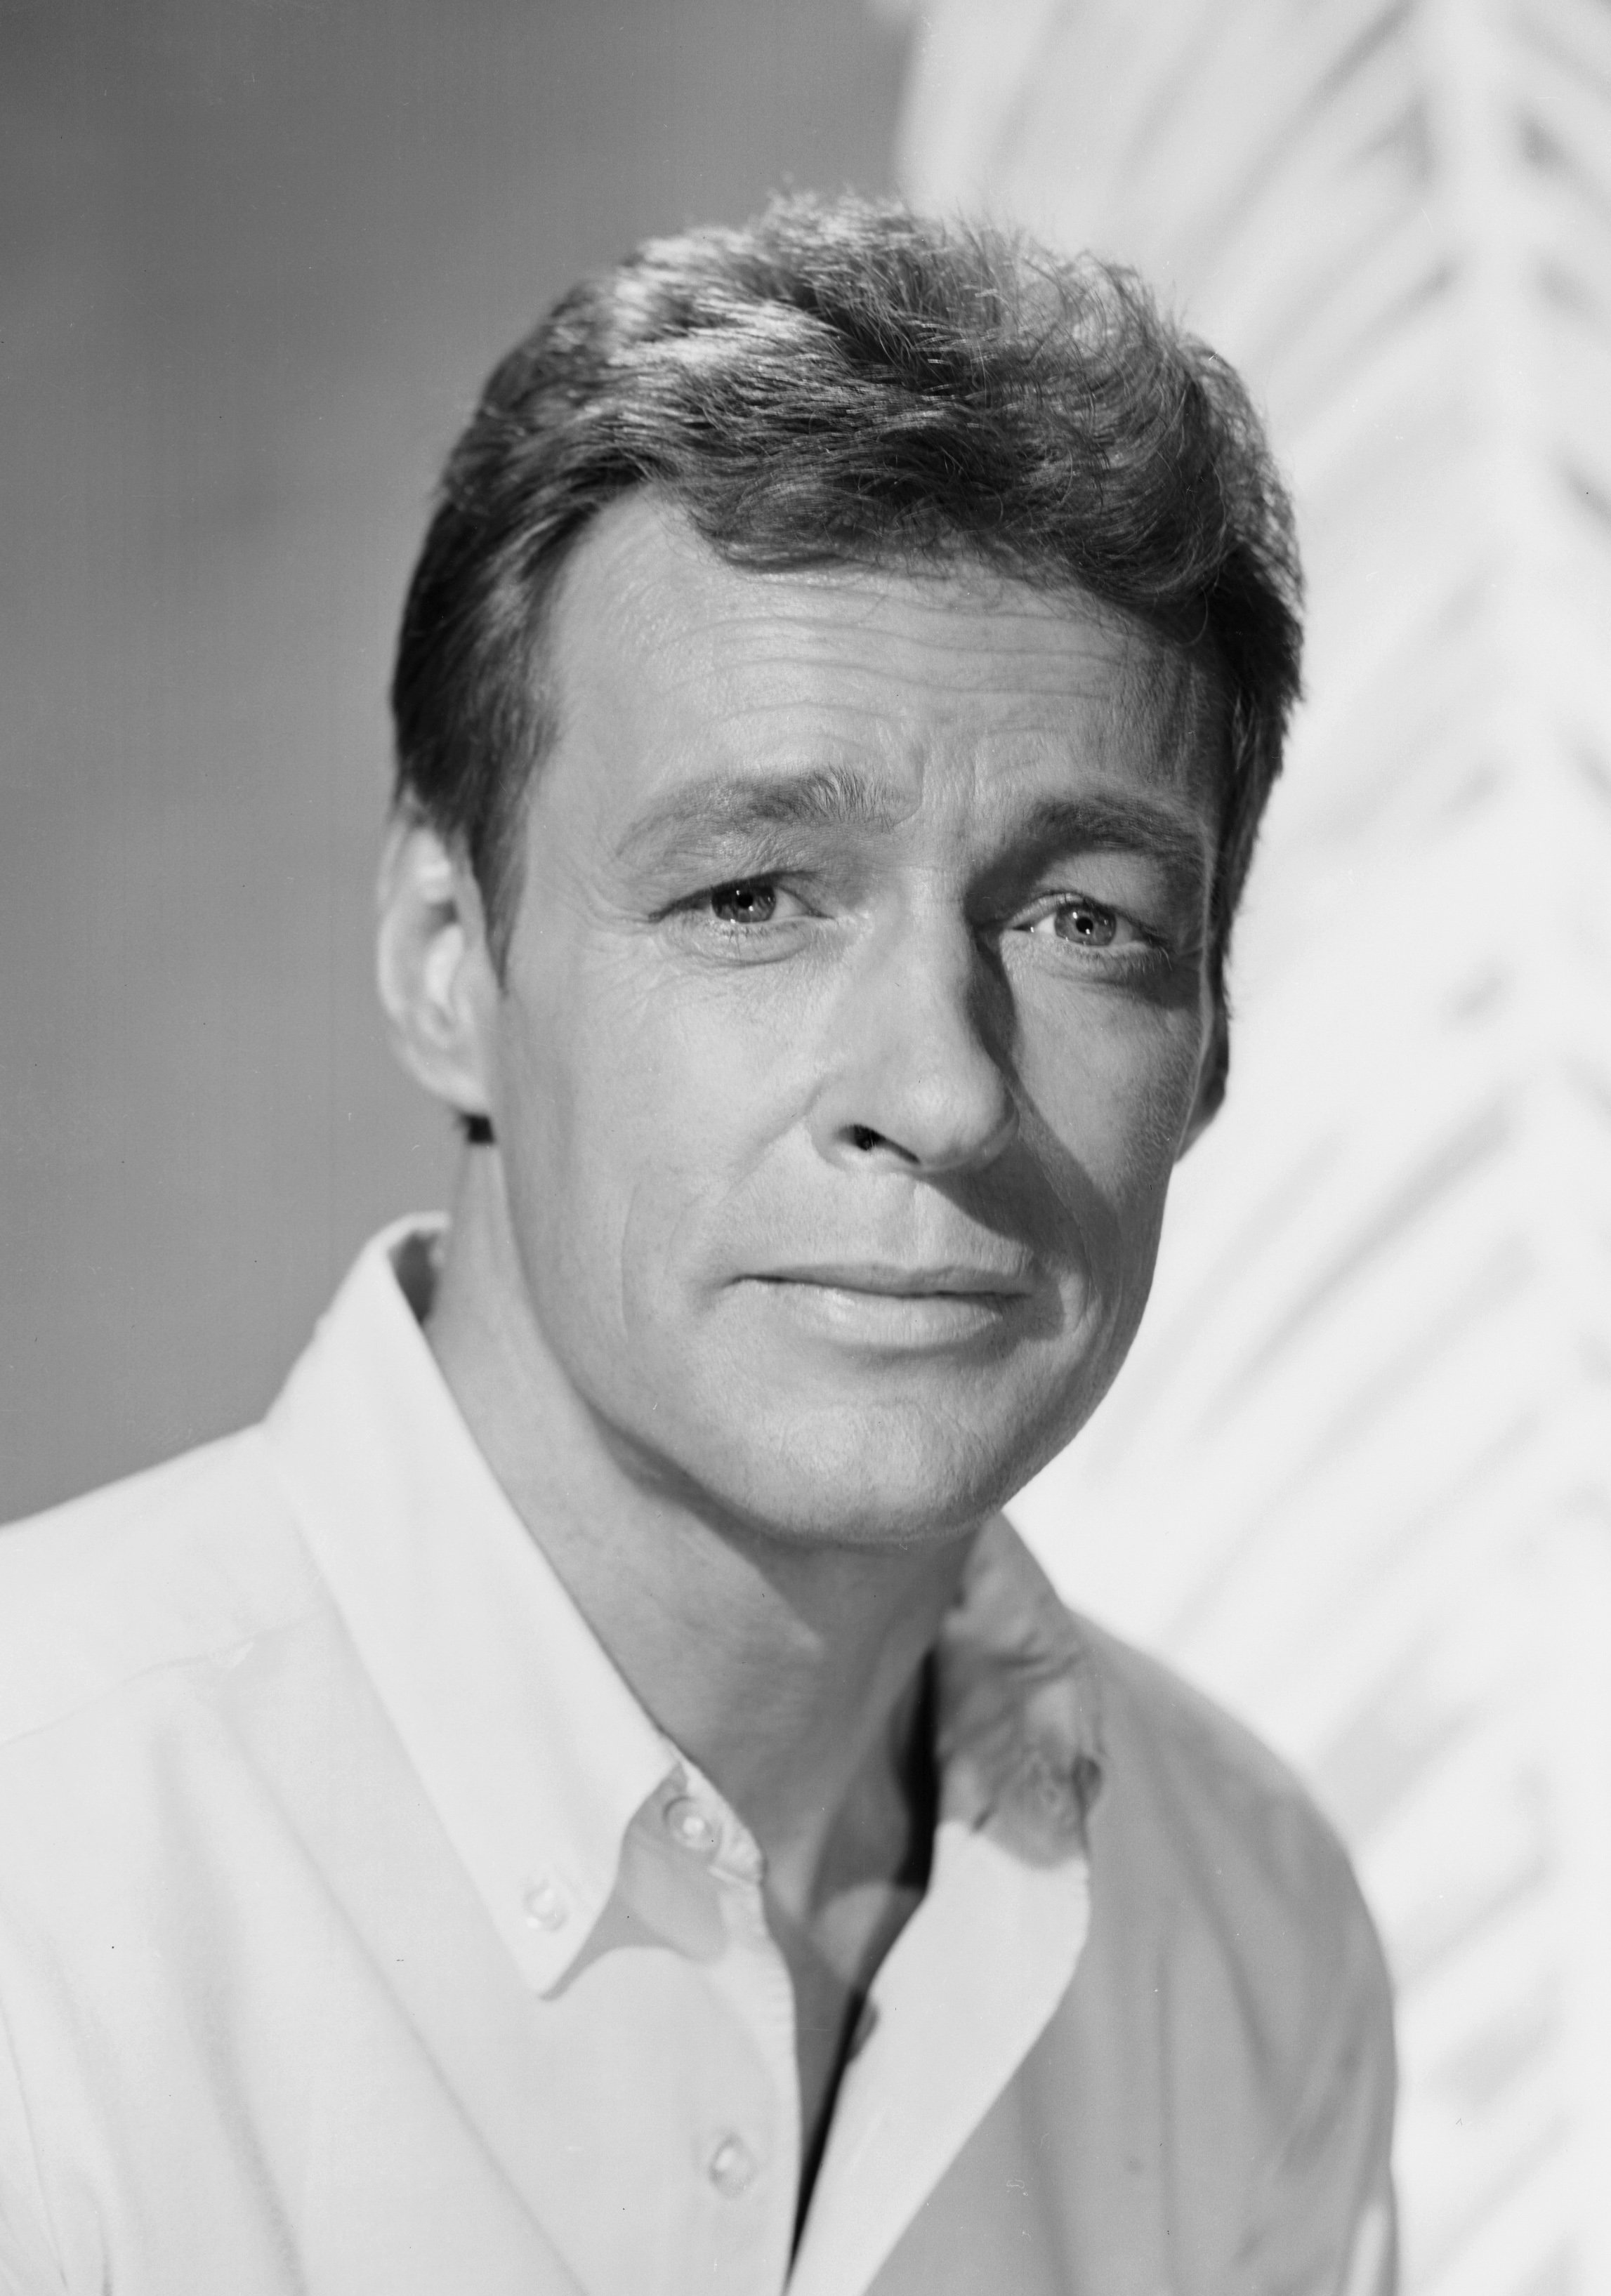 Russell Johnson as "The Professor" Roy Hinkley